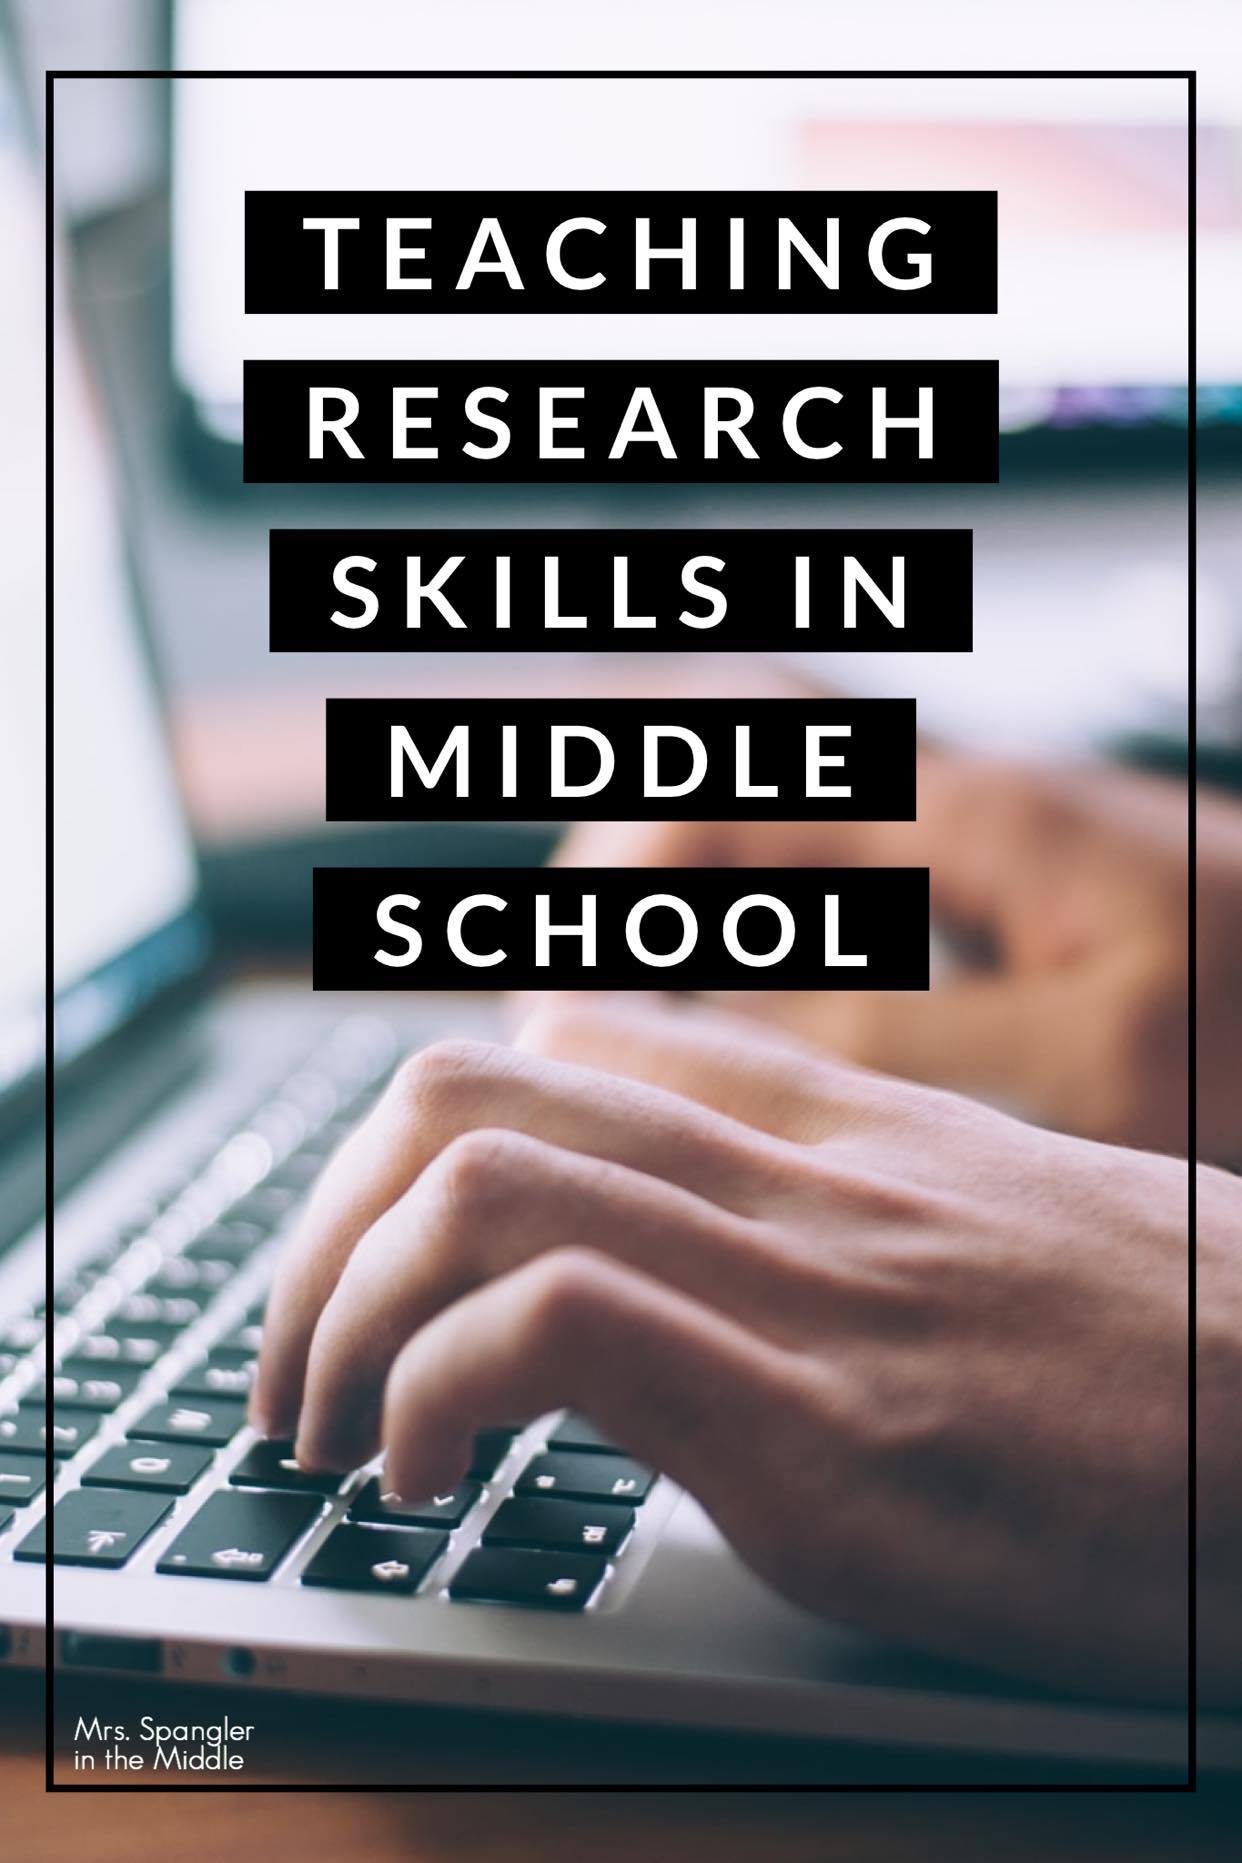 how to teach research skills in middle school